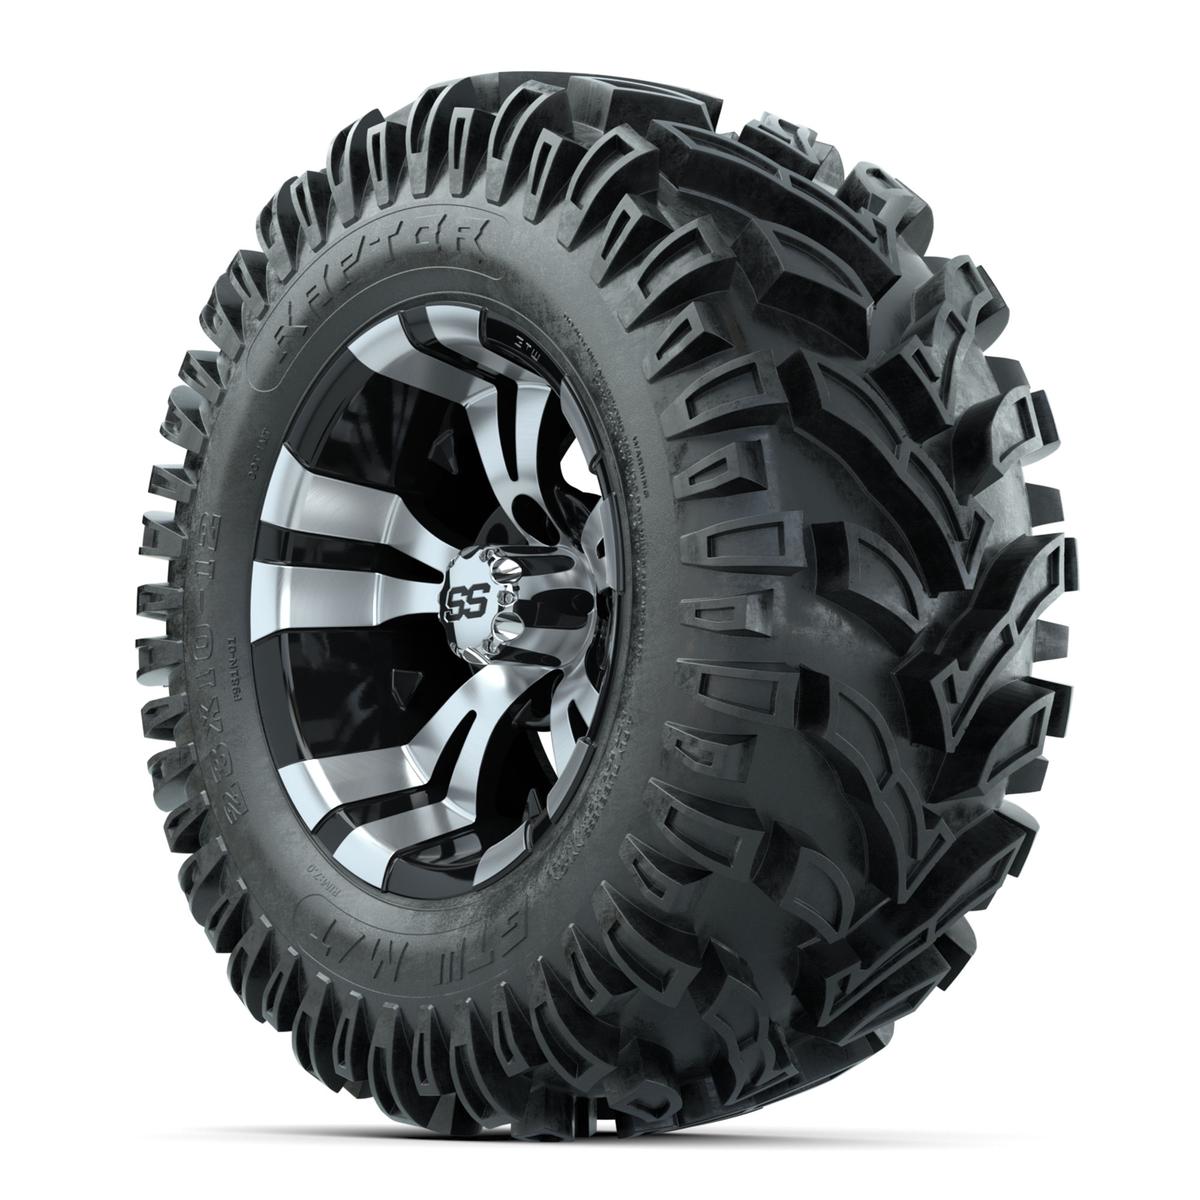 12” GTW Vampire Black and Machined Wheels with 23” Raptor Mud Tires – Set of 4